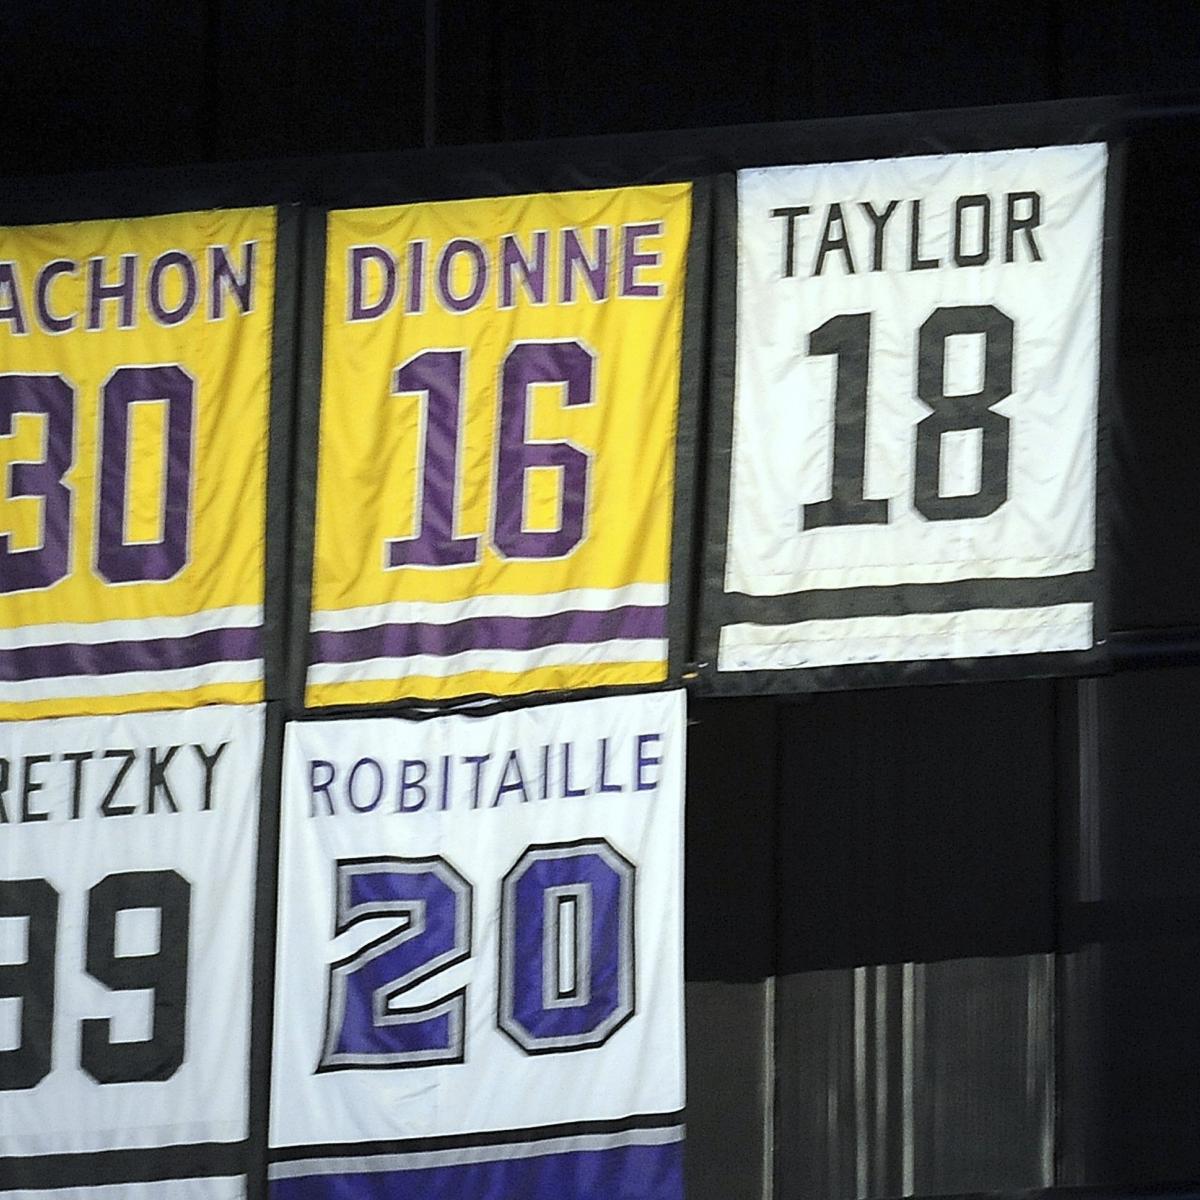 One player's number that should be retired from each NHL team